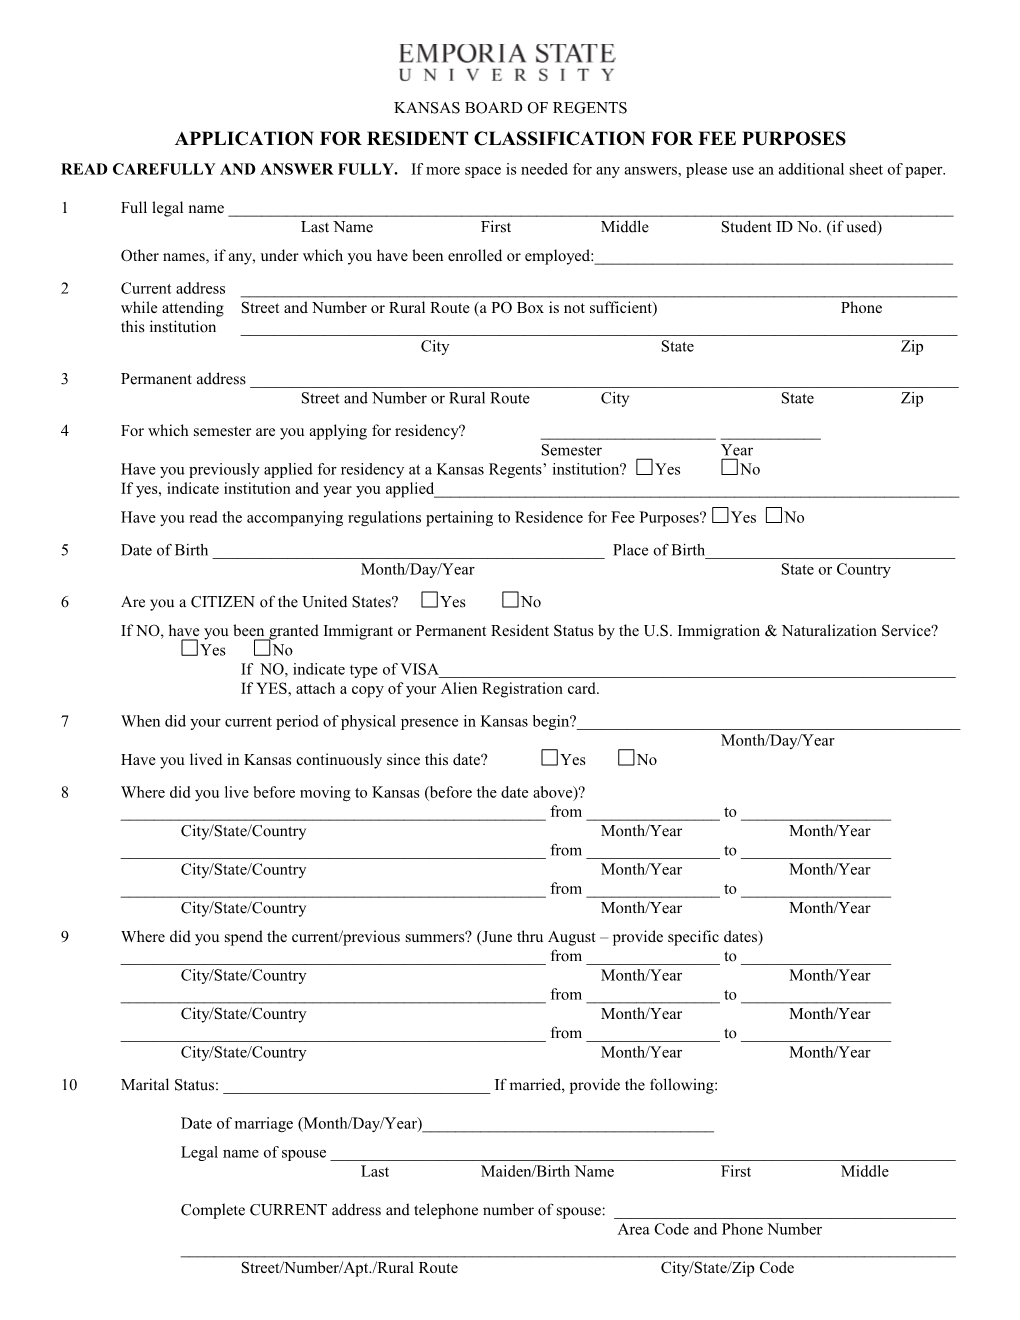 Application for Resident Classification for Fee Purposes